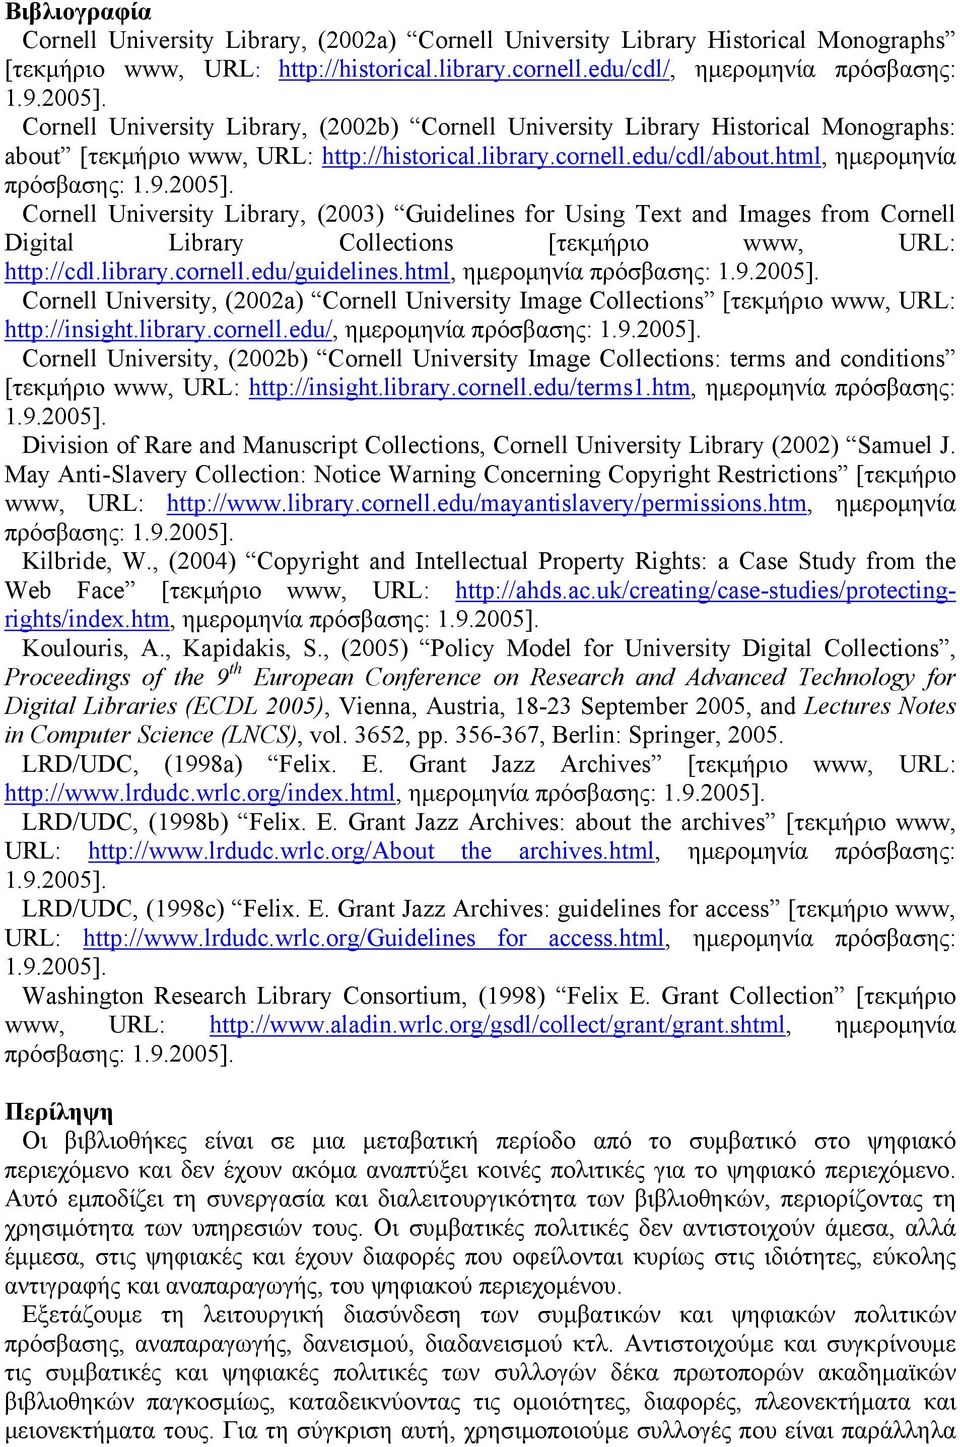 Cornell University Library, (2003) Guidelines for Using Text and Images from Cornell Digital Library Collections [τεκμήριο www, URL: http://cdl.library.cornell.edu/guidelines.